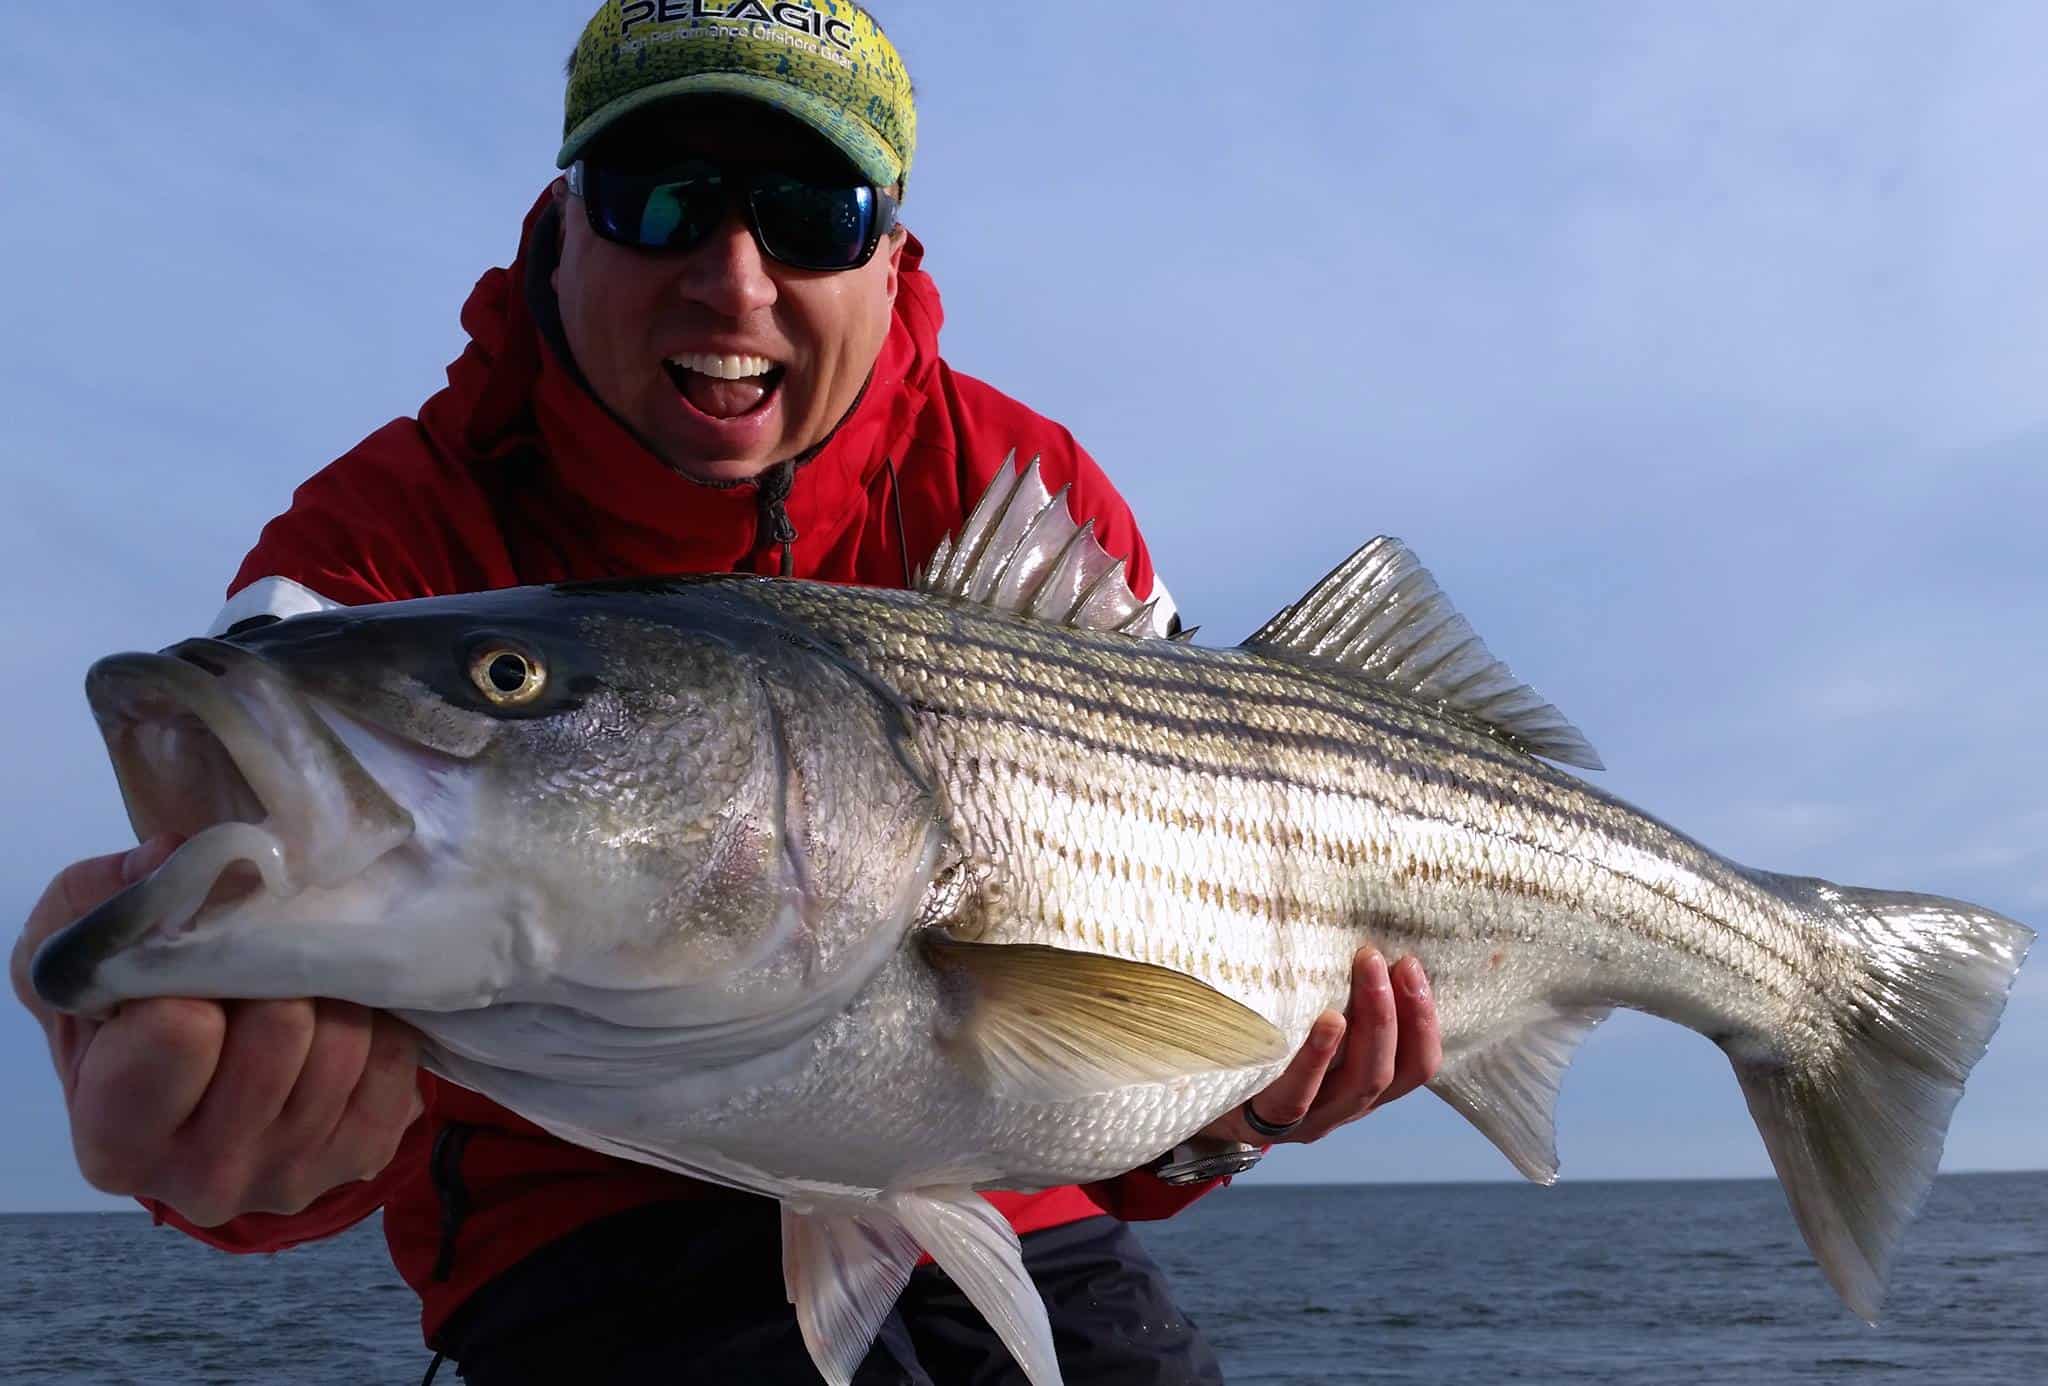 CCA Angler's Guide to Draft Amendment 7 for Striped Bass - March 2022